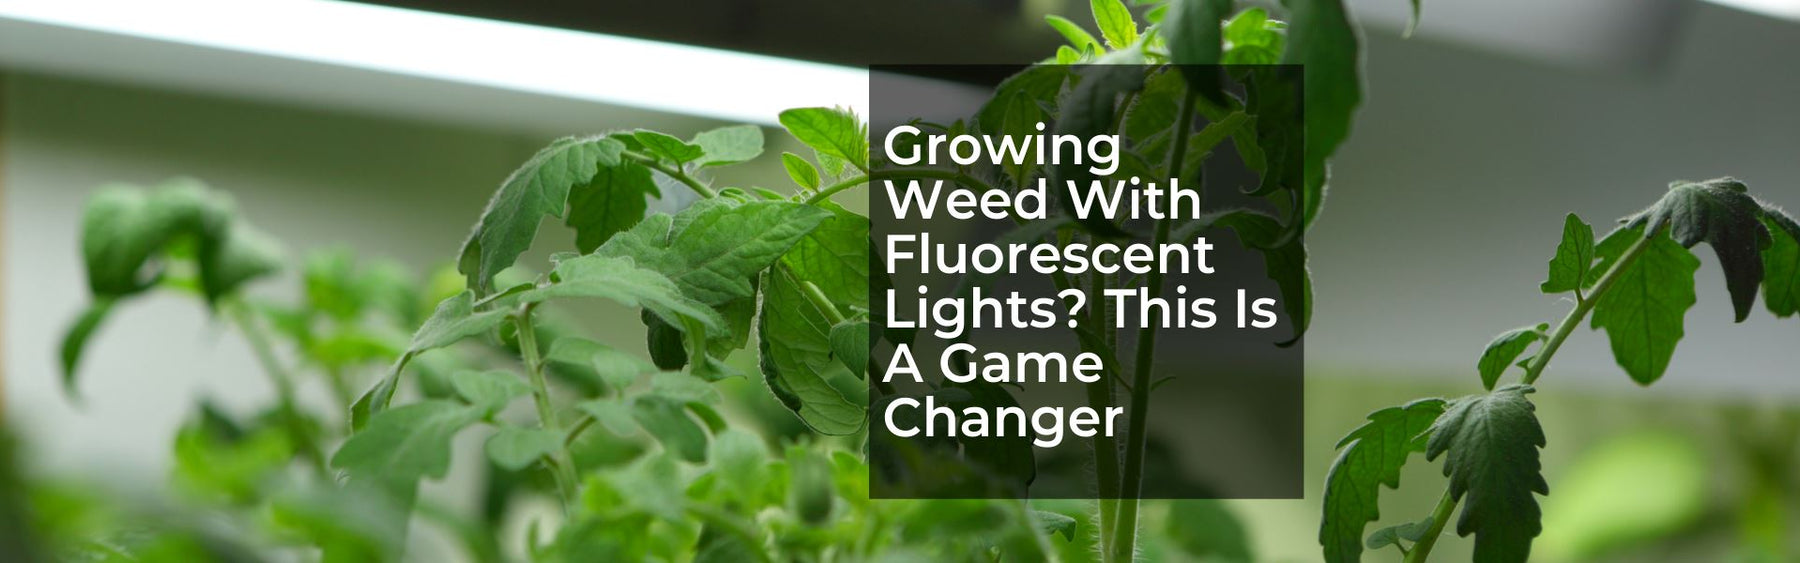 Growing Weed With Fluorescent Lights? This Is A Game Changer